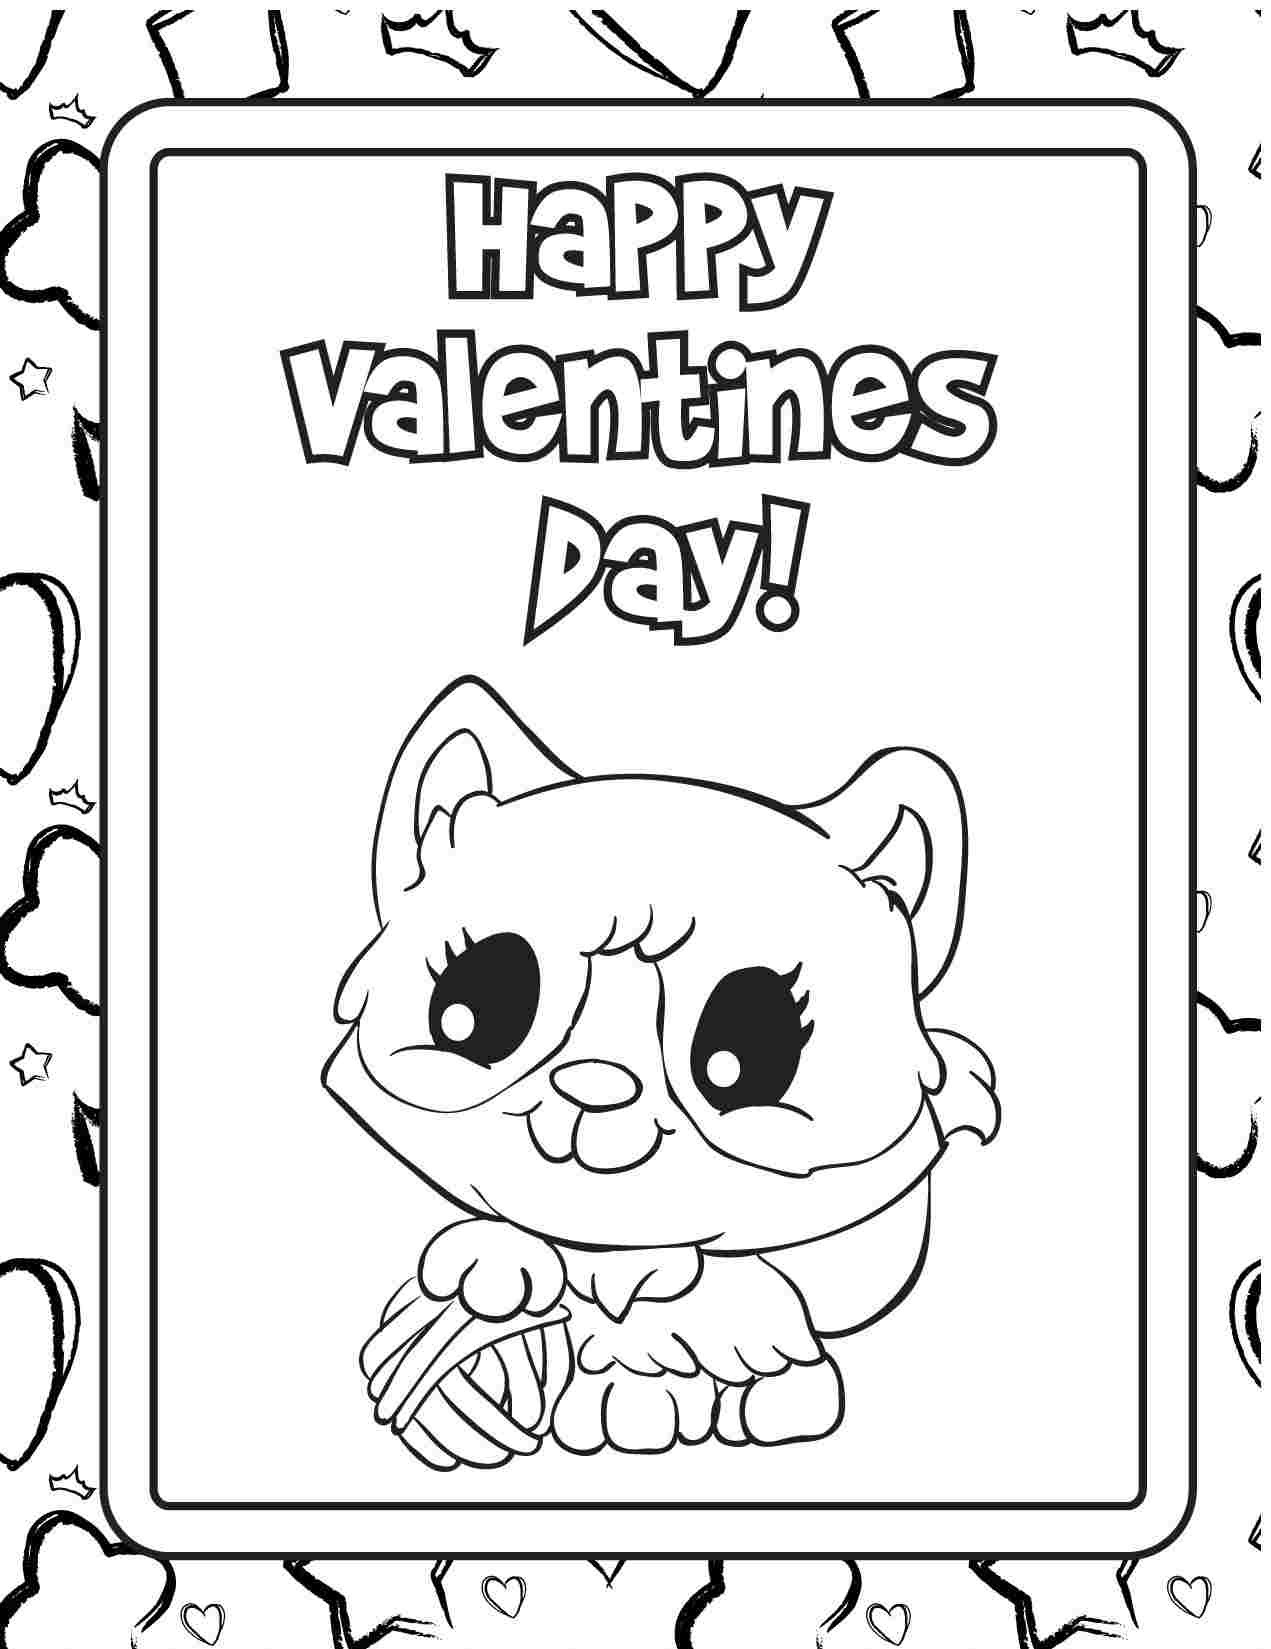 printable-valentine-cards-to-color